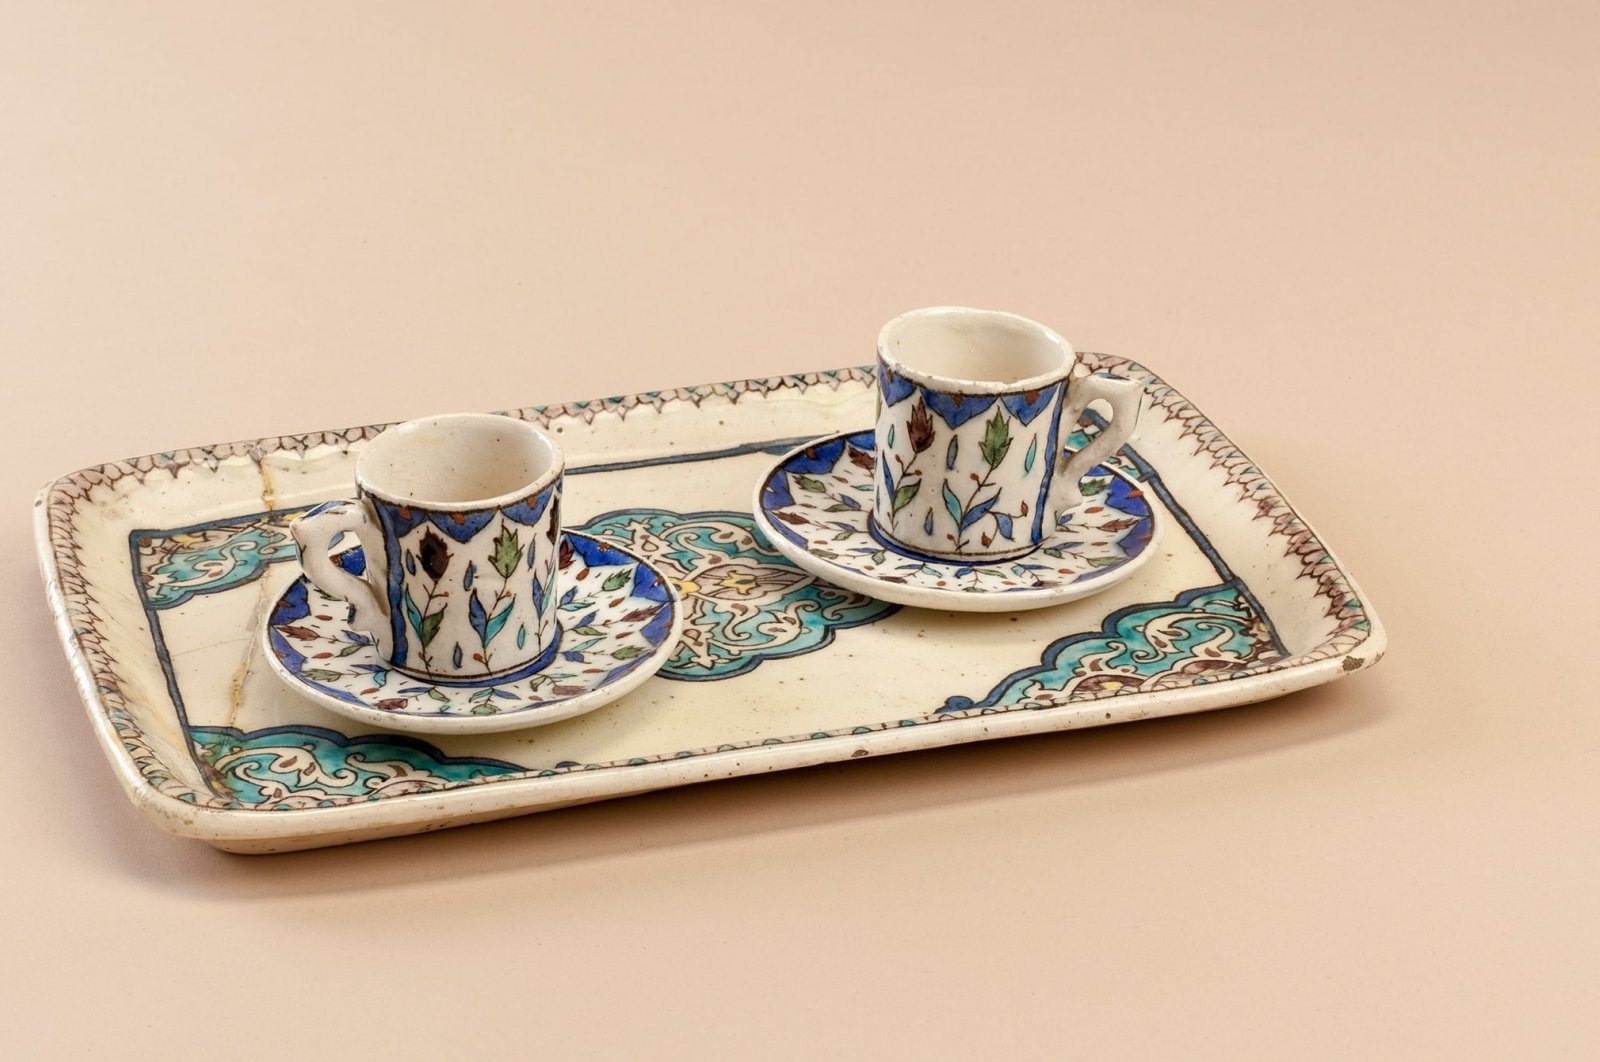 Two Turkish coffee cups from &quot;Kütahya Tiles and Ceramics&quot; exhibition at Pera Museum, Istanbul, Türkiye. (Photo courtesy of Pera Museum)